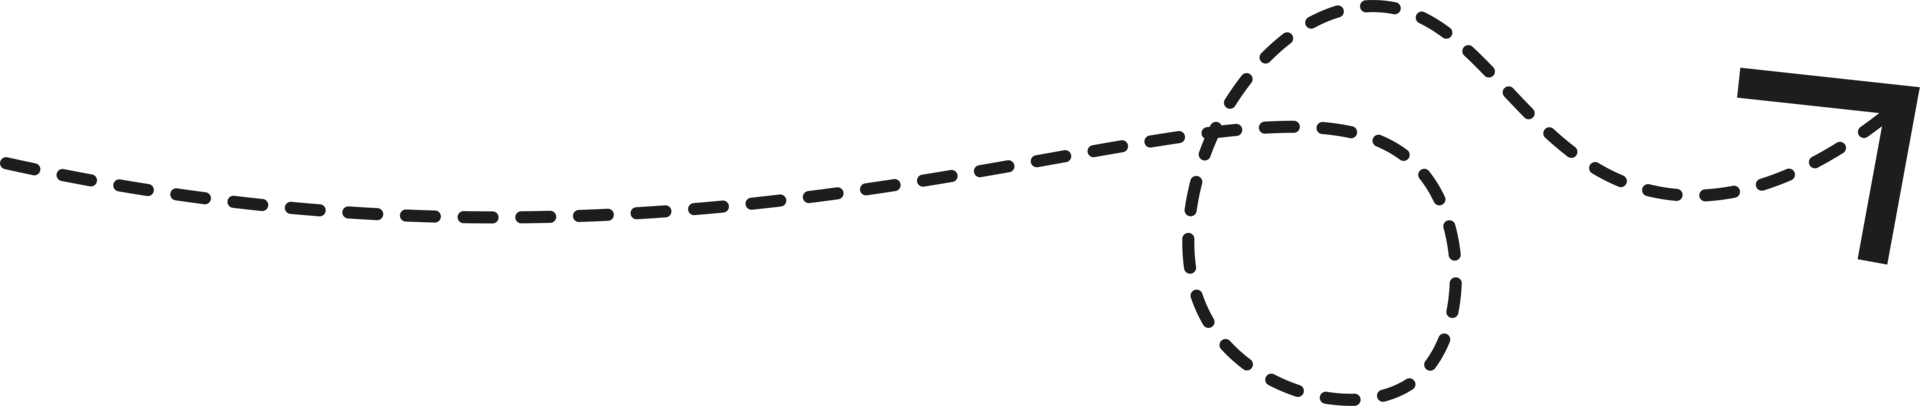 Dashed Line Arrow png